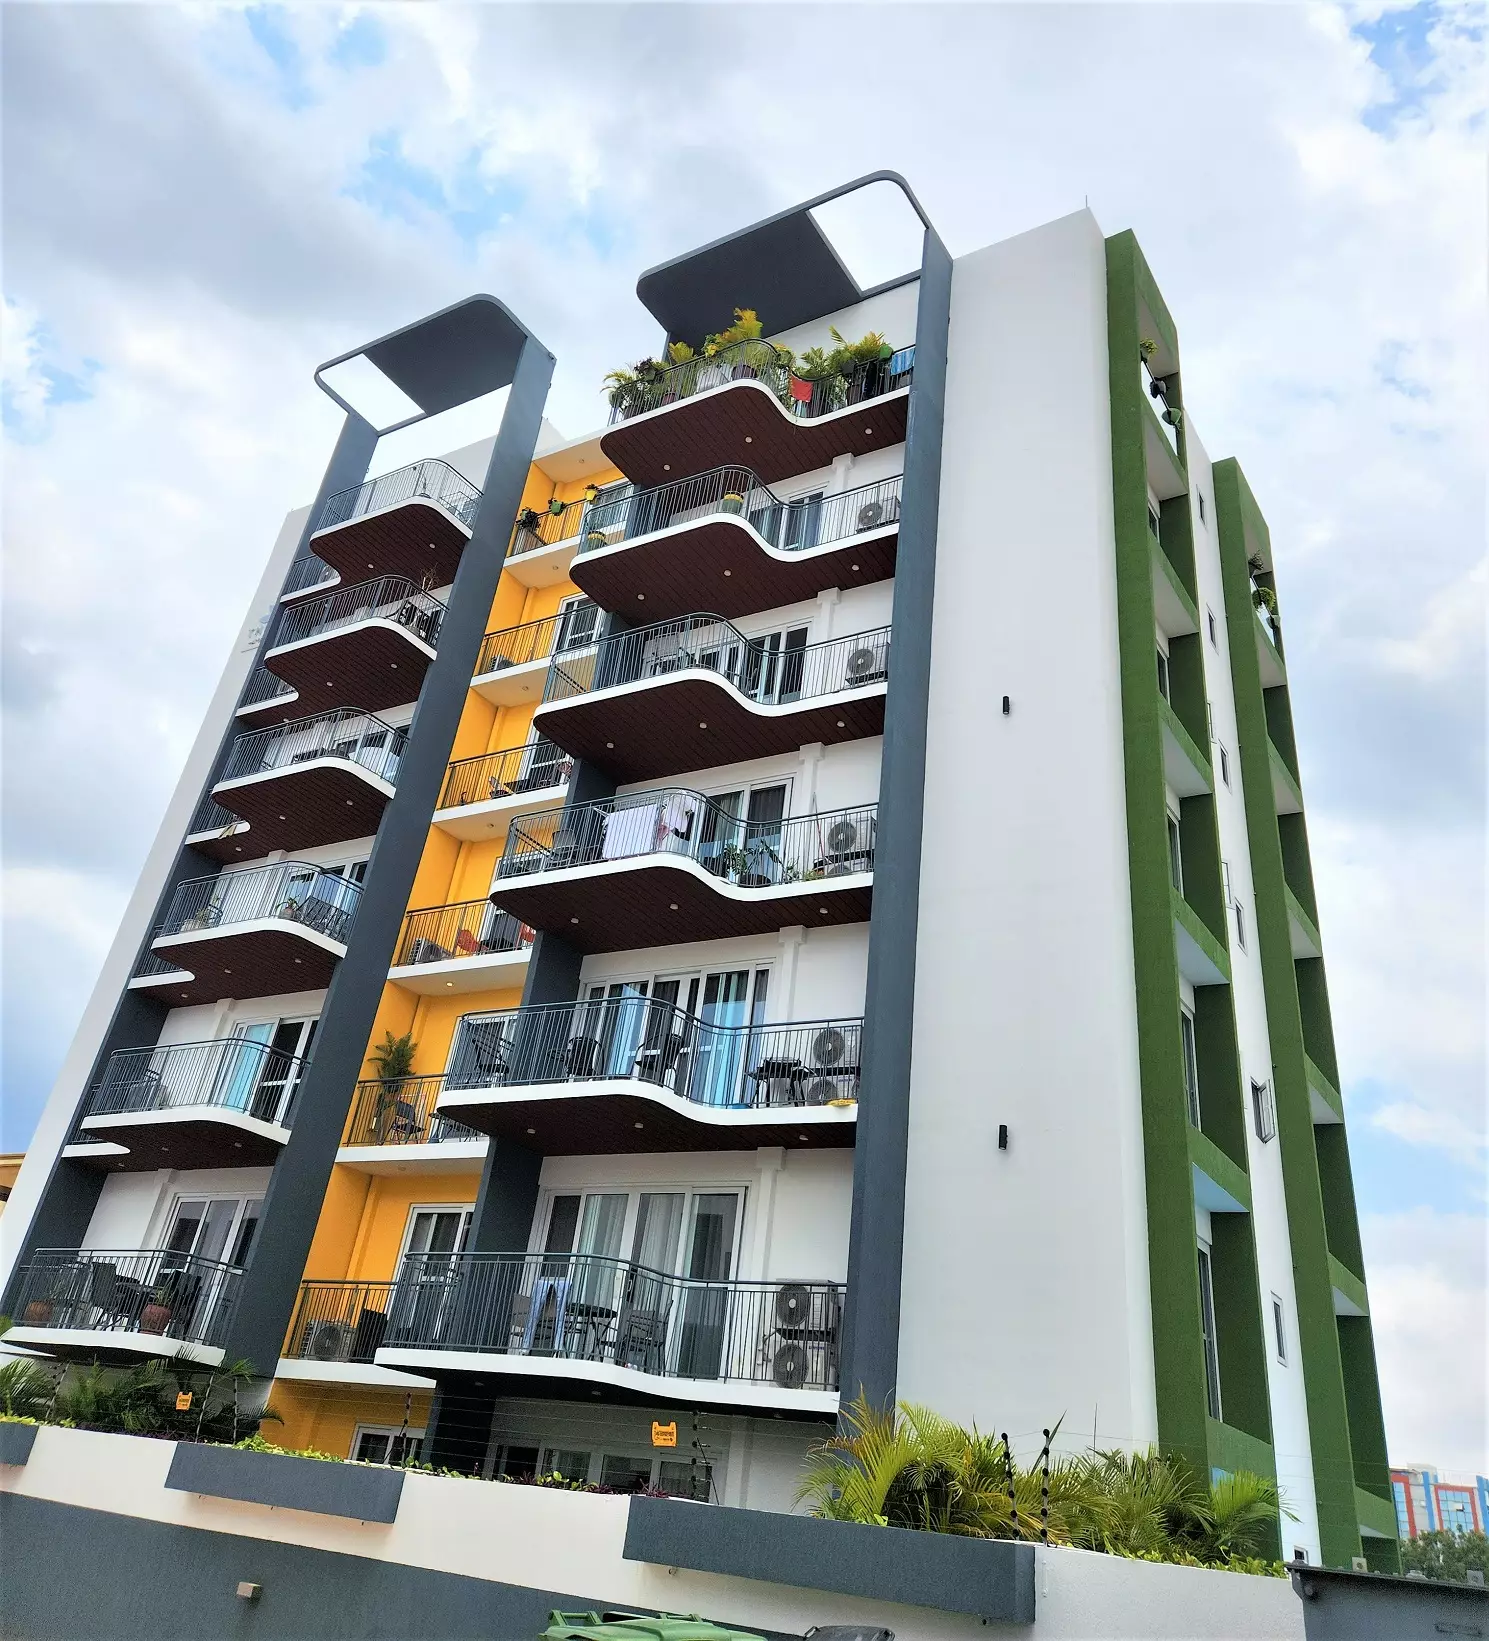 Executive 1-bedroom with modern interior in Accra, Ghana